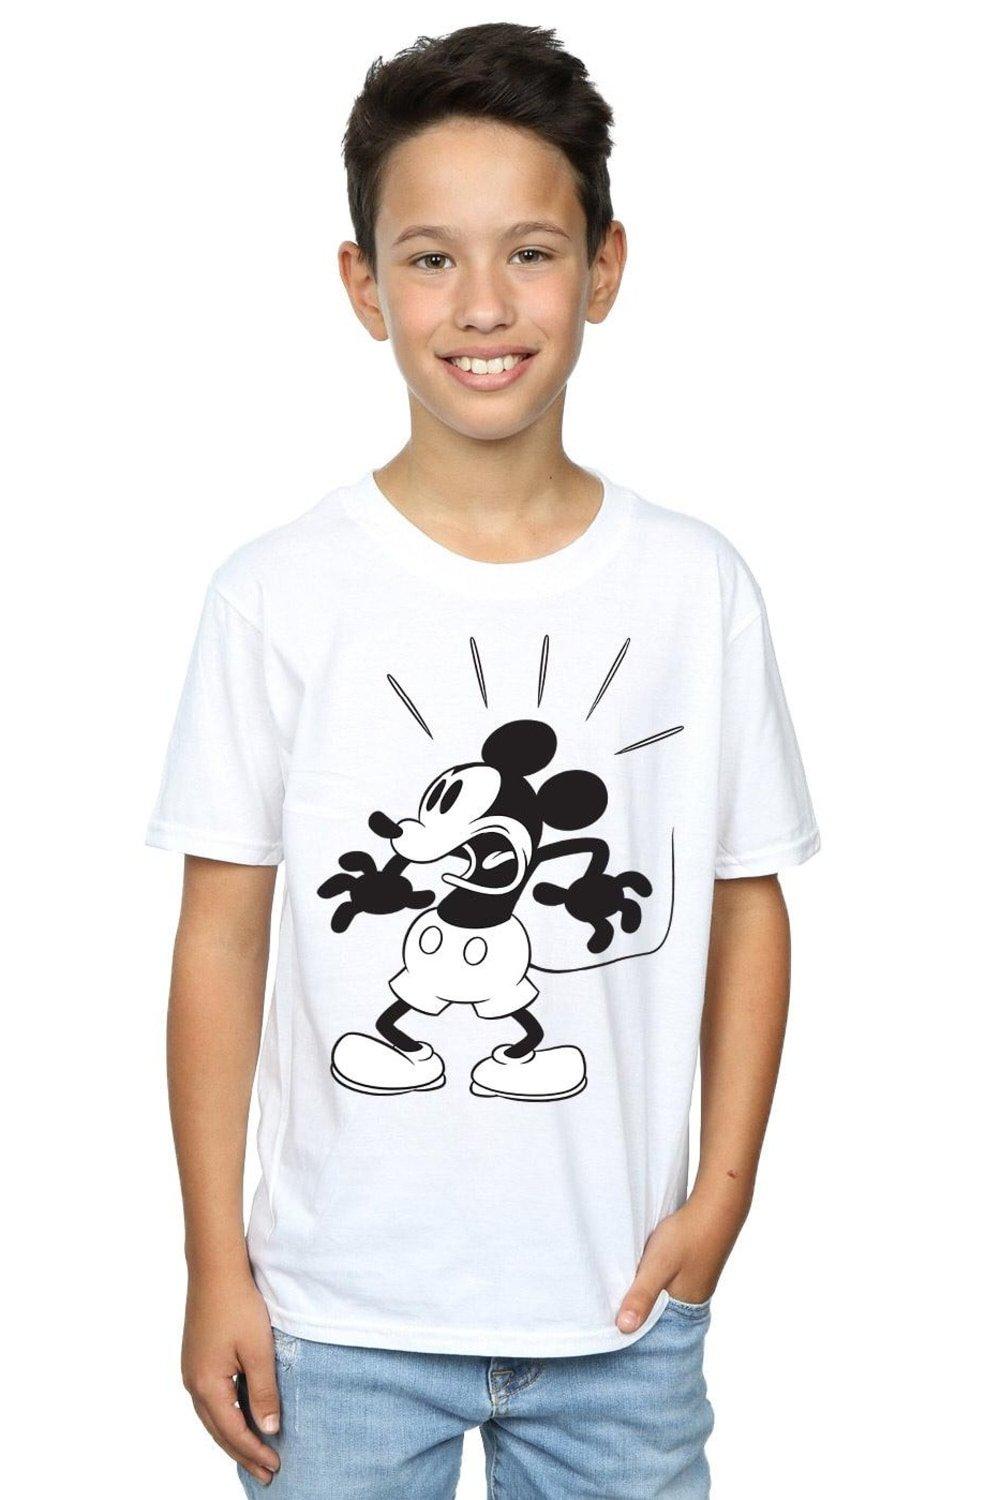 Mickey Mouse Scared T-Shirt